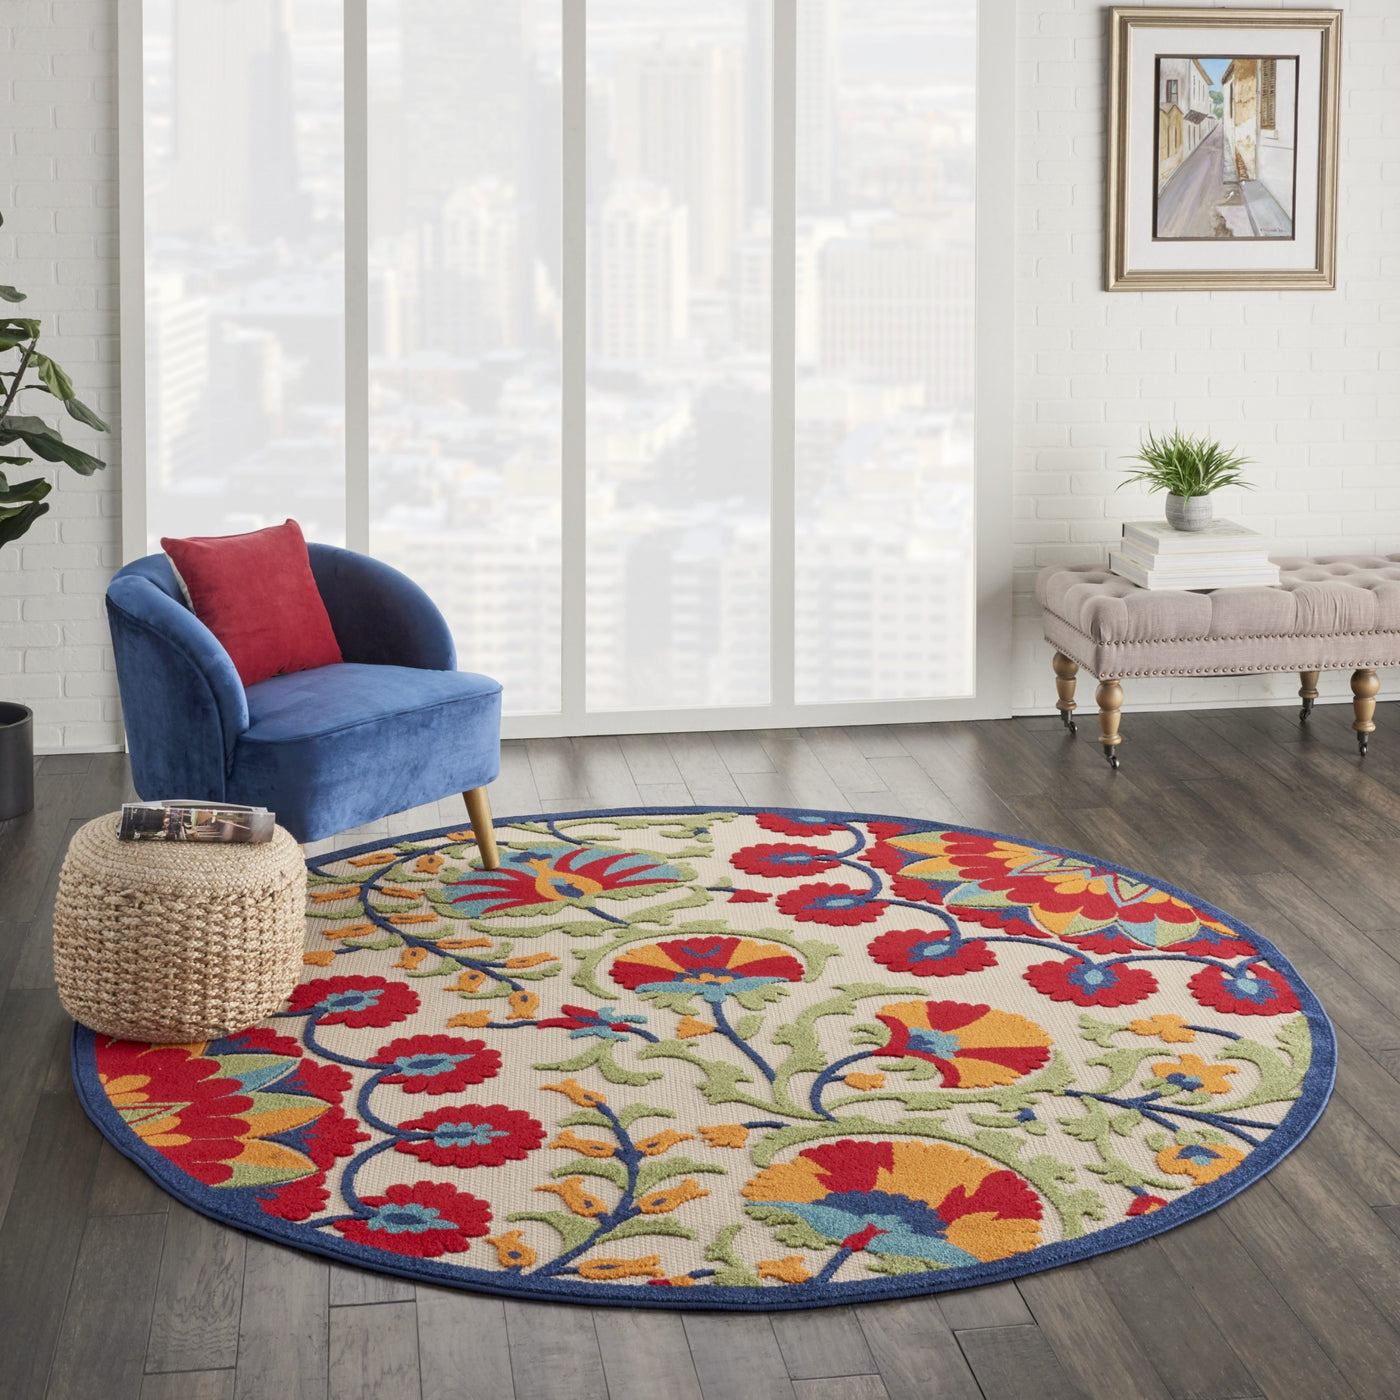 3' X 4' Red And Ivory Floral Indoor Outdoor Area Rug